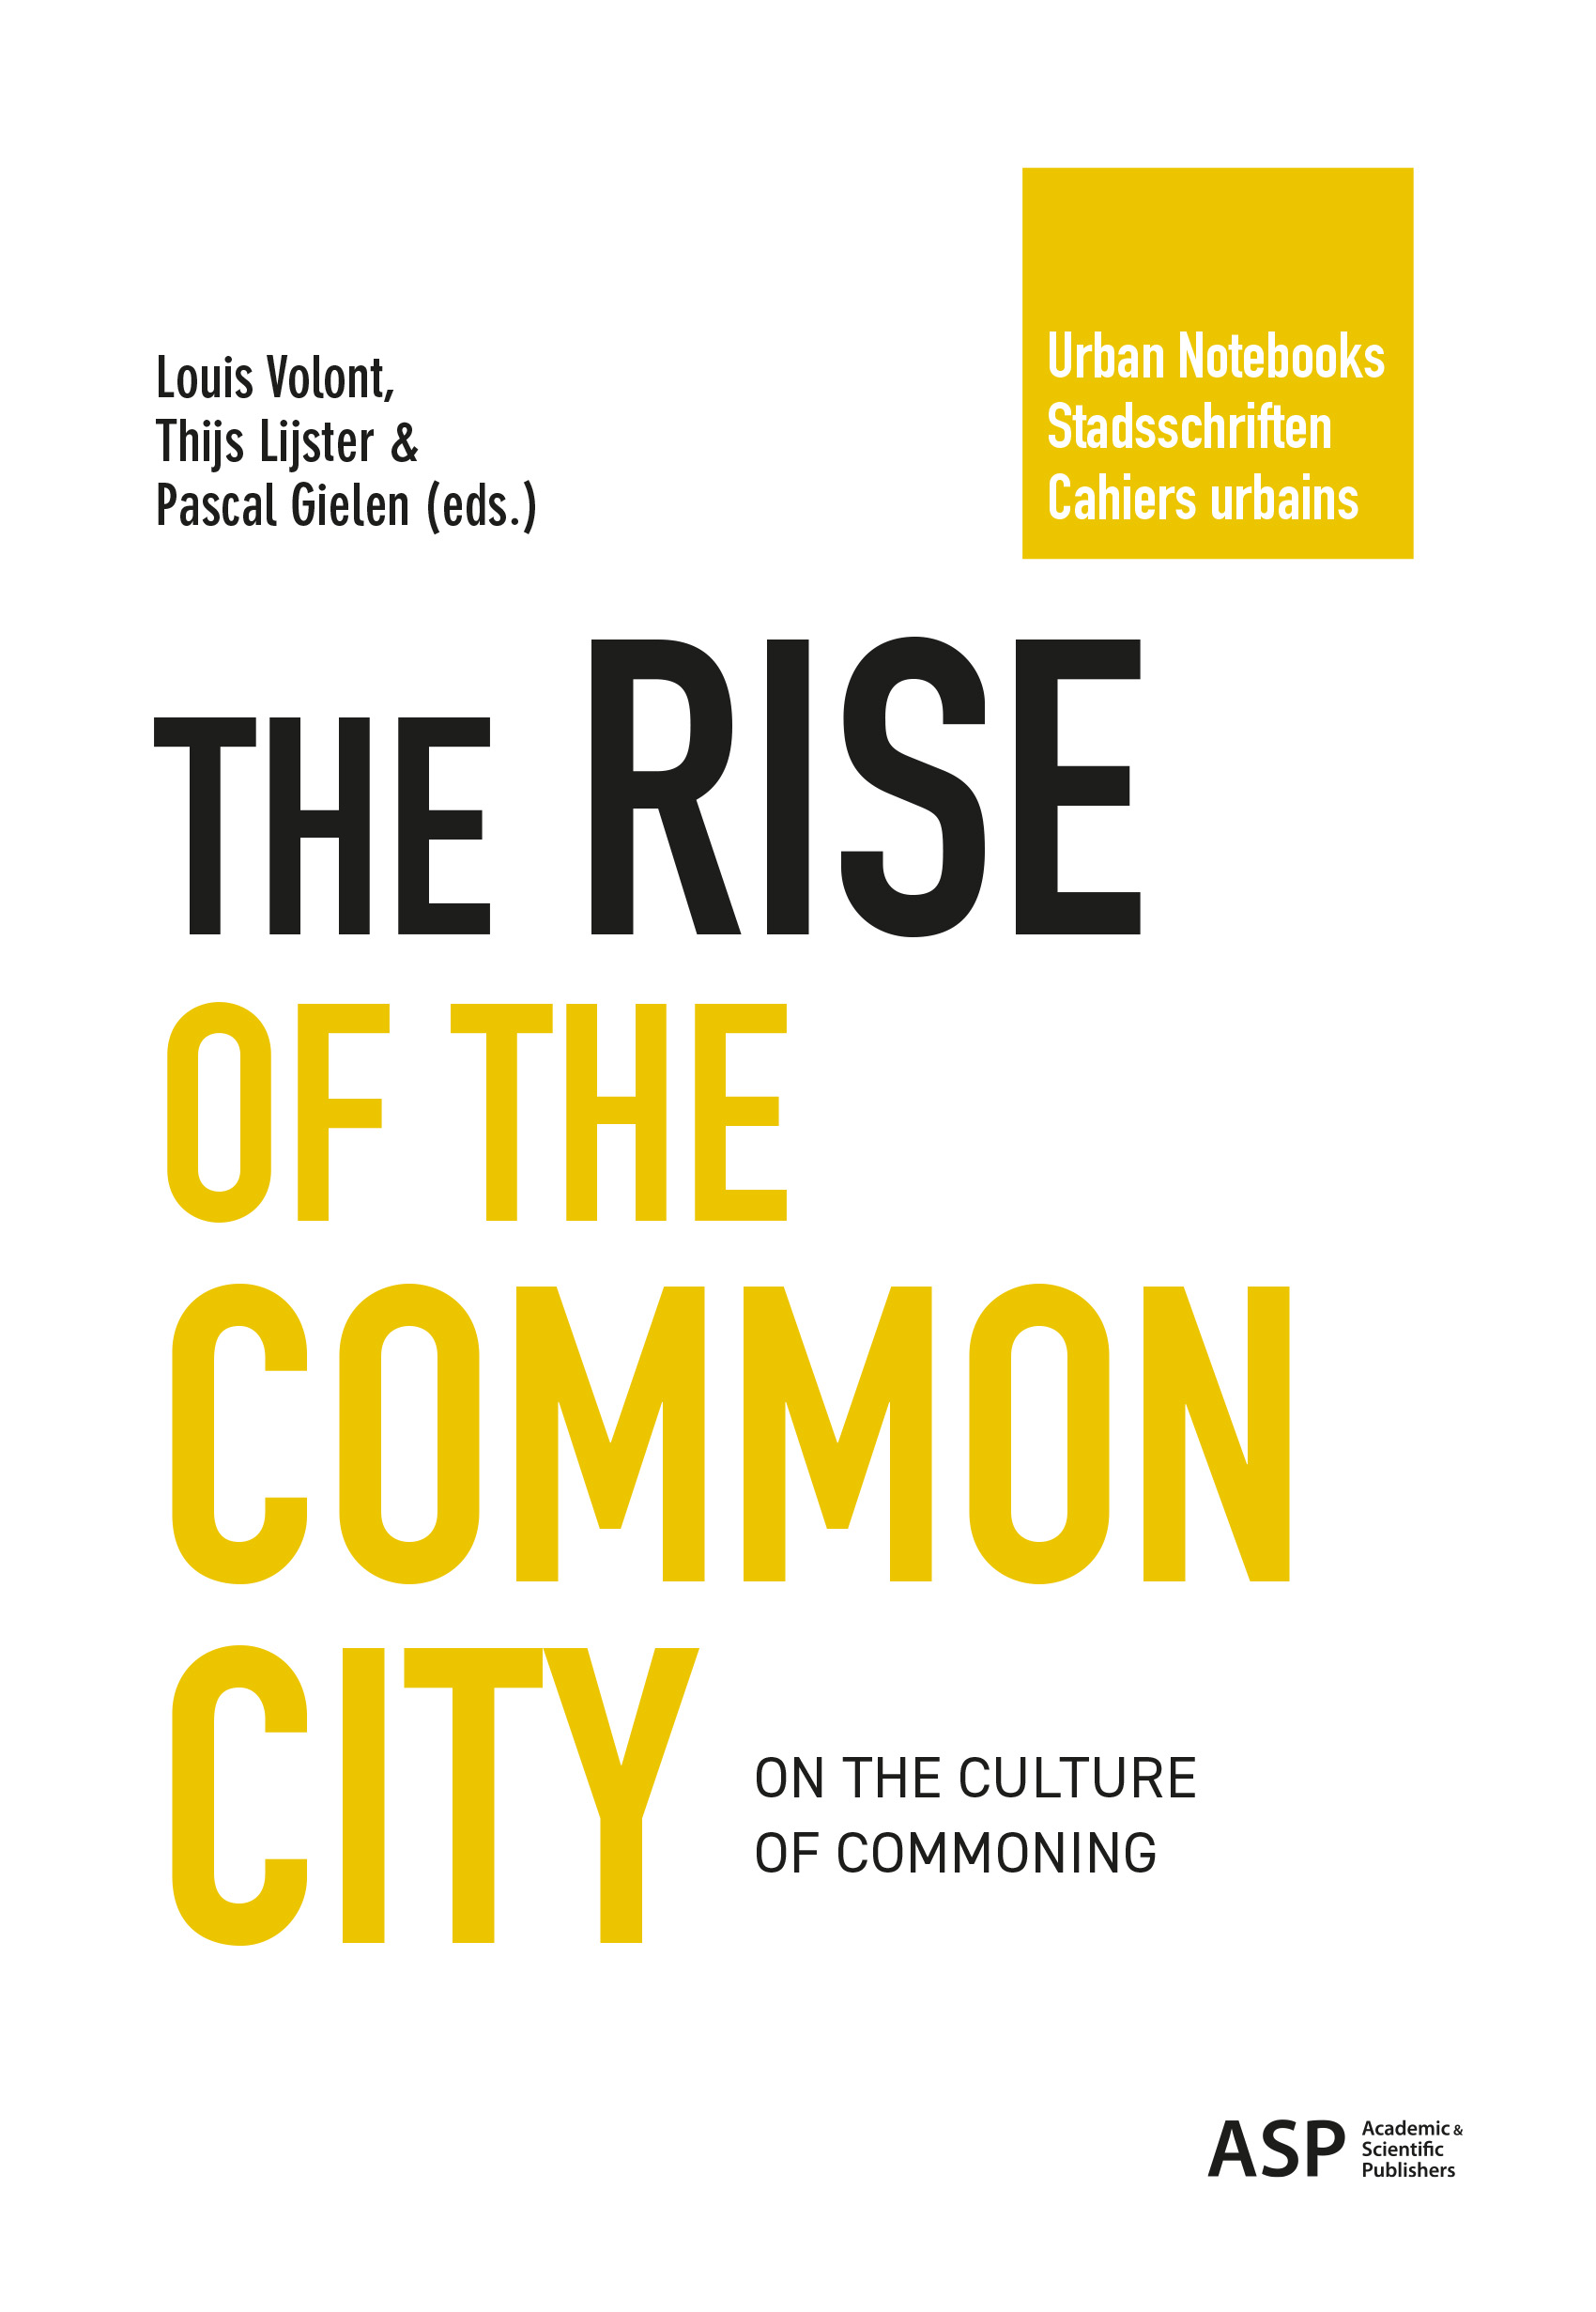 THE RISE OF THE COMMON CITY